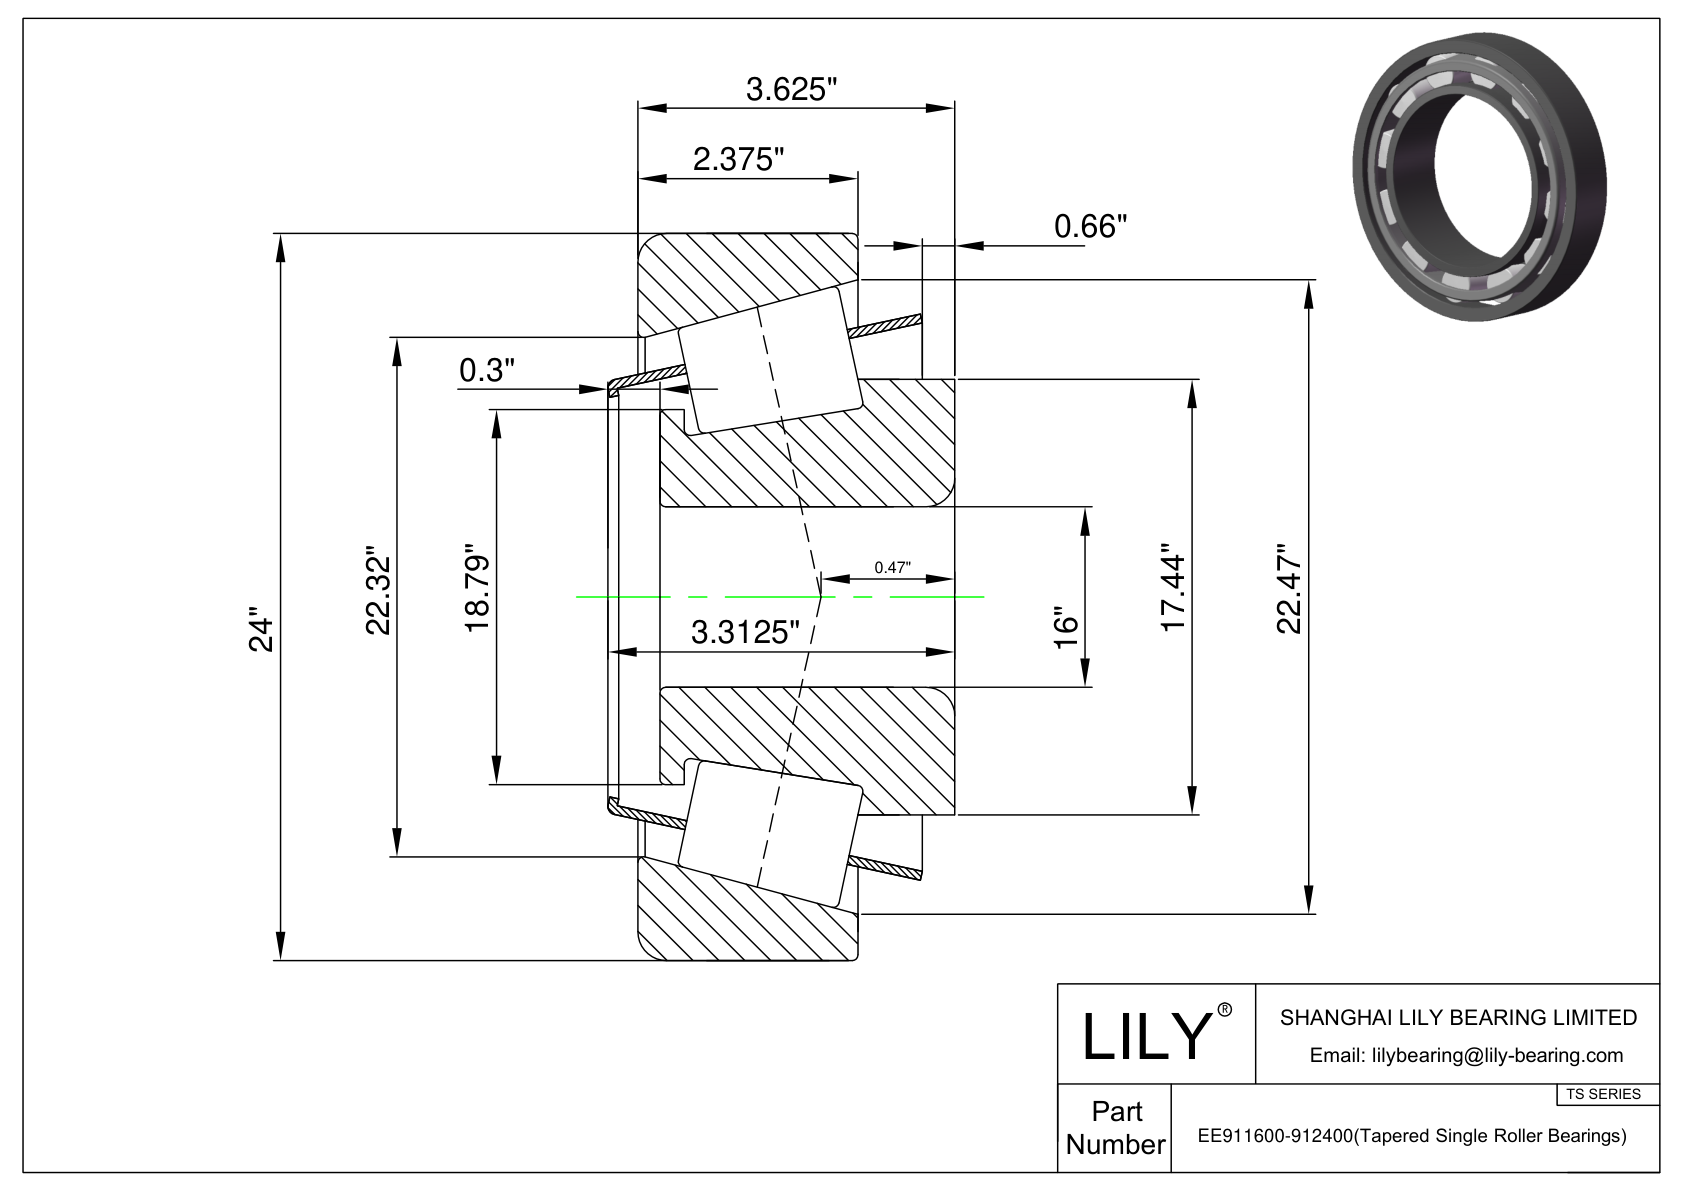 EE911600-912400 TS (Tapered Single Roller Bearings) (Imperial) cad drawing